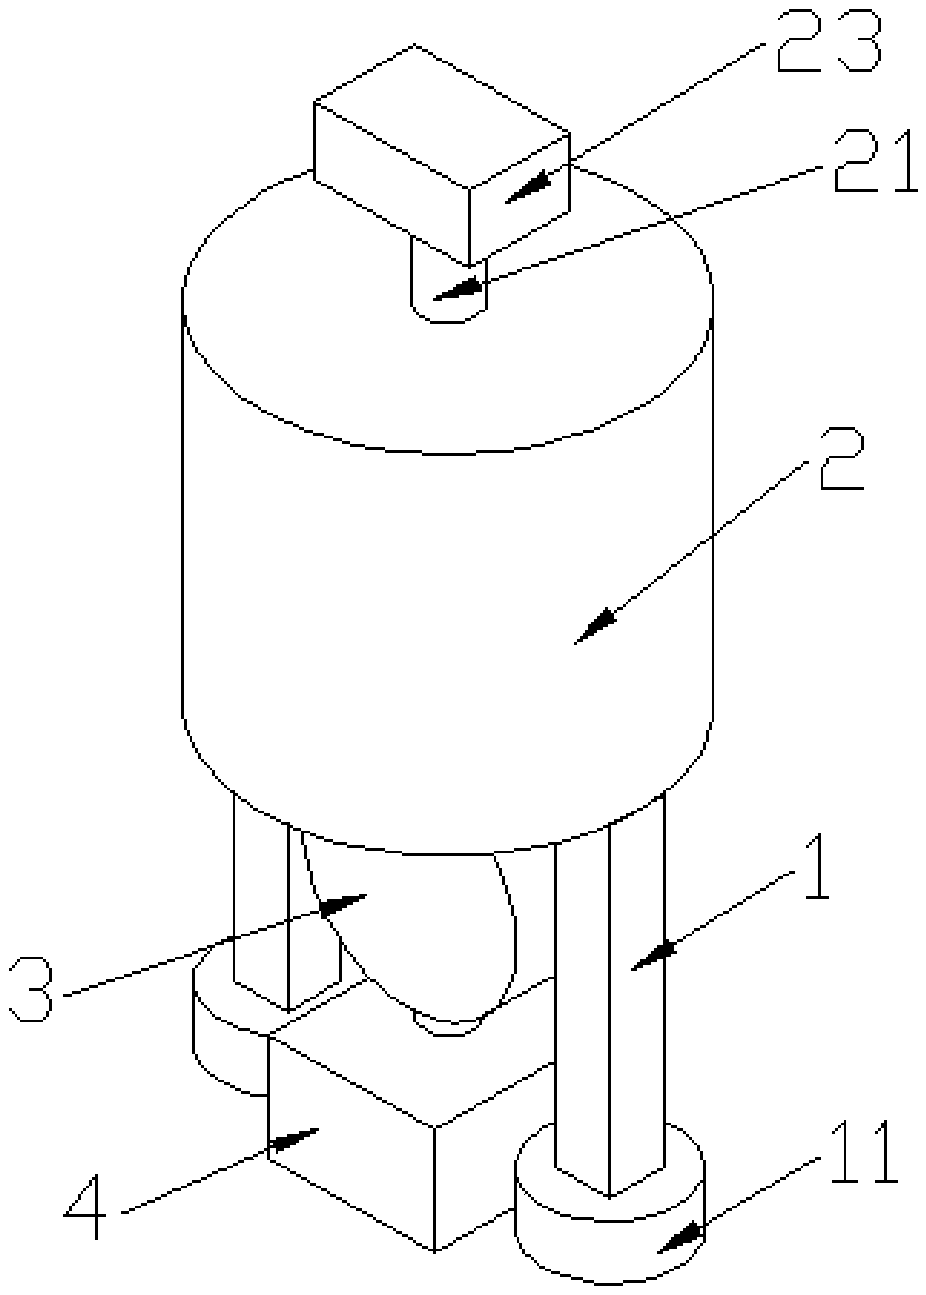 Bacterial manure mixing device containing multi-vitamins